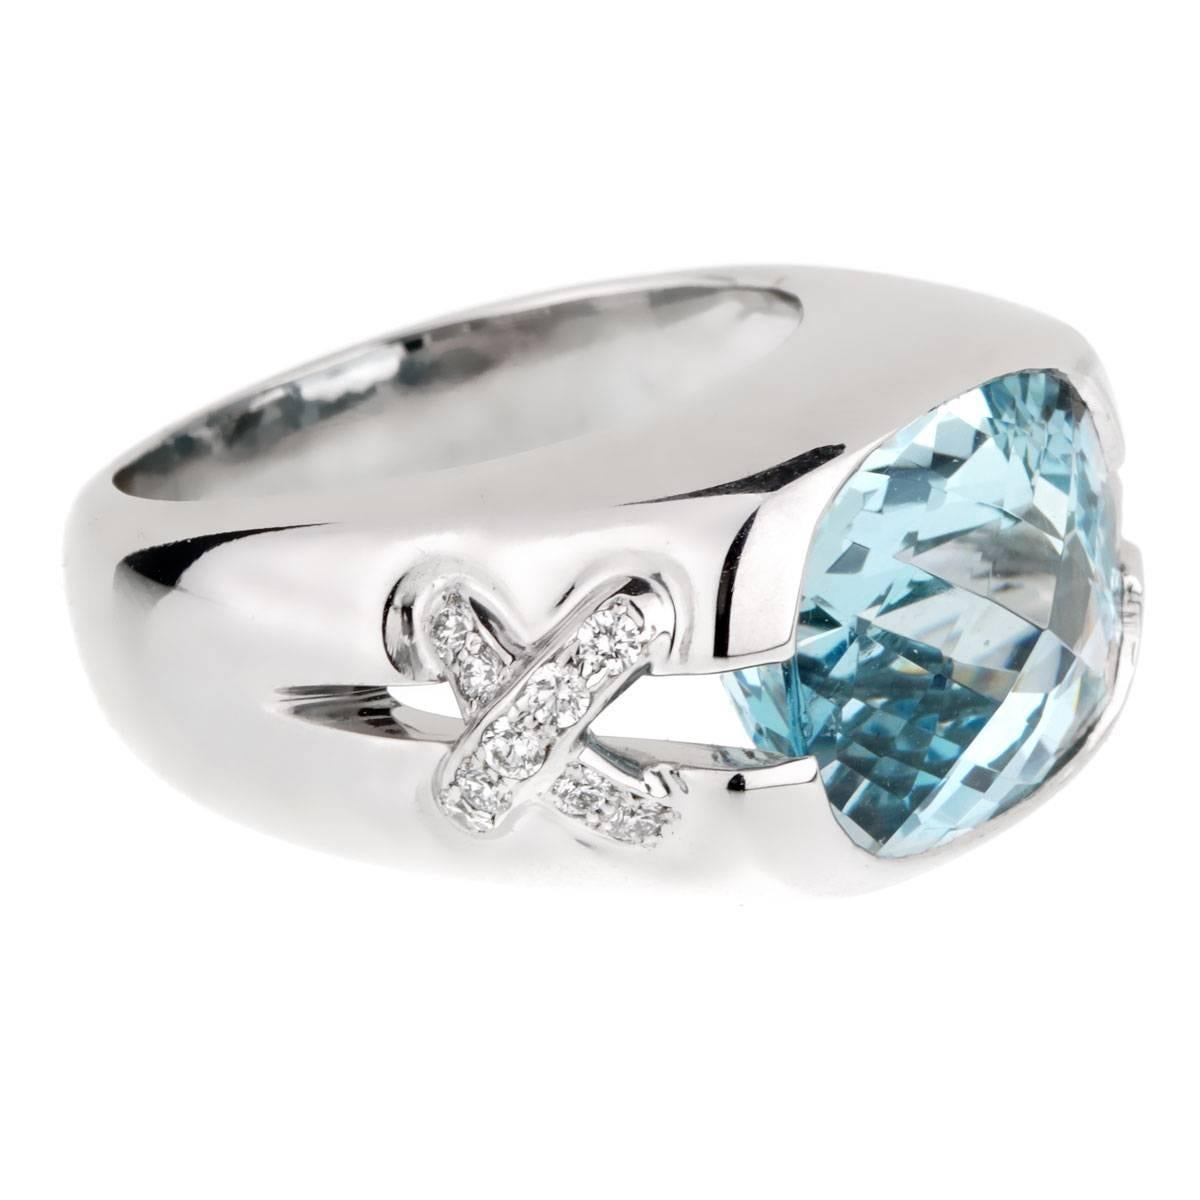 A chic Tiffany & Co diamond featuring featuring a gorgeous Aquamarine flanked by round brilliant cut diamonds in 18k white gold.